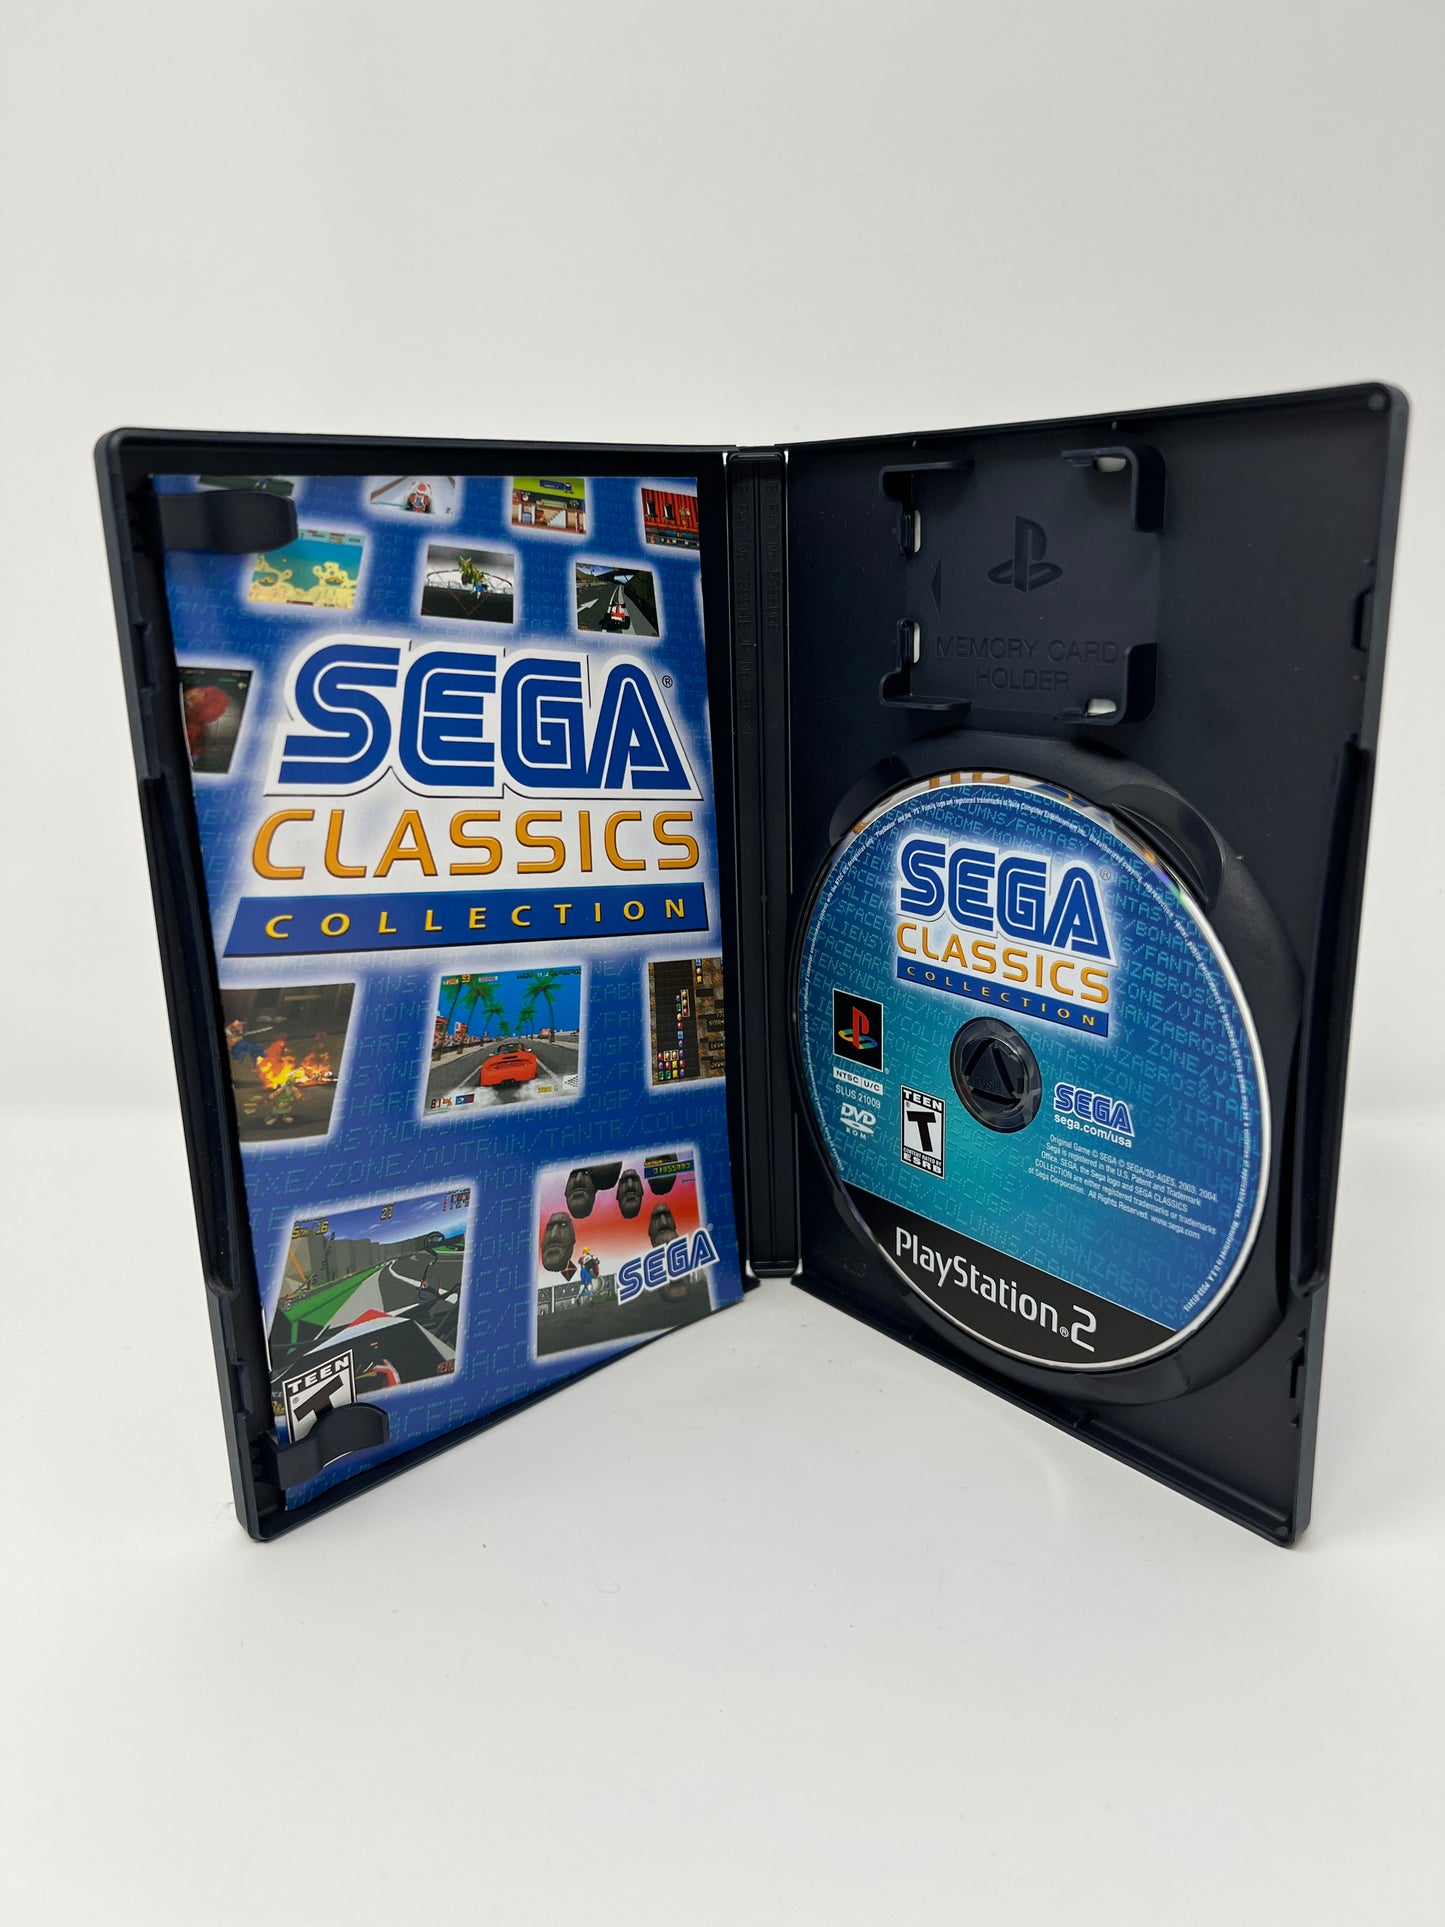 Sega Classics Collection - PS2 Game - Used